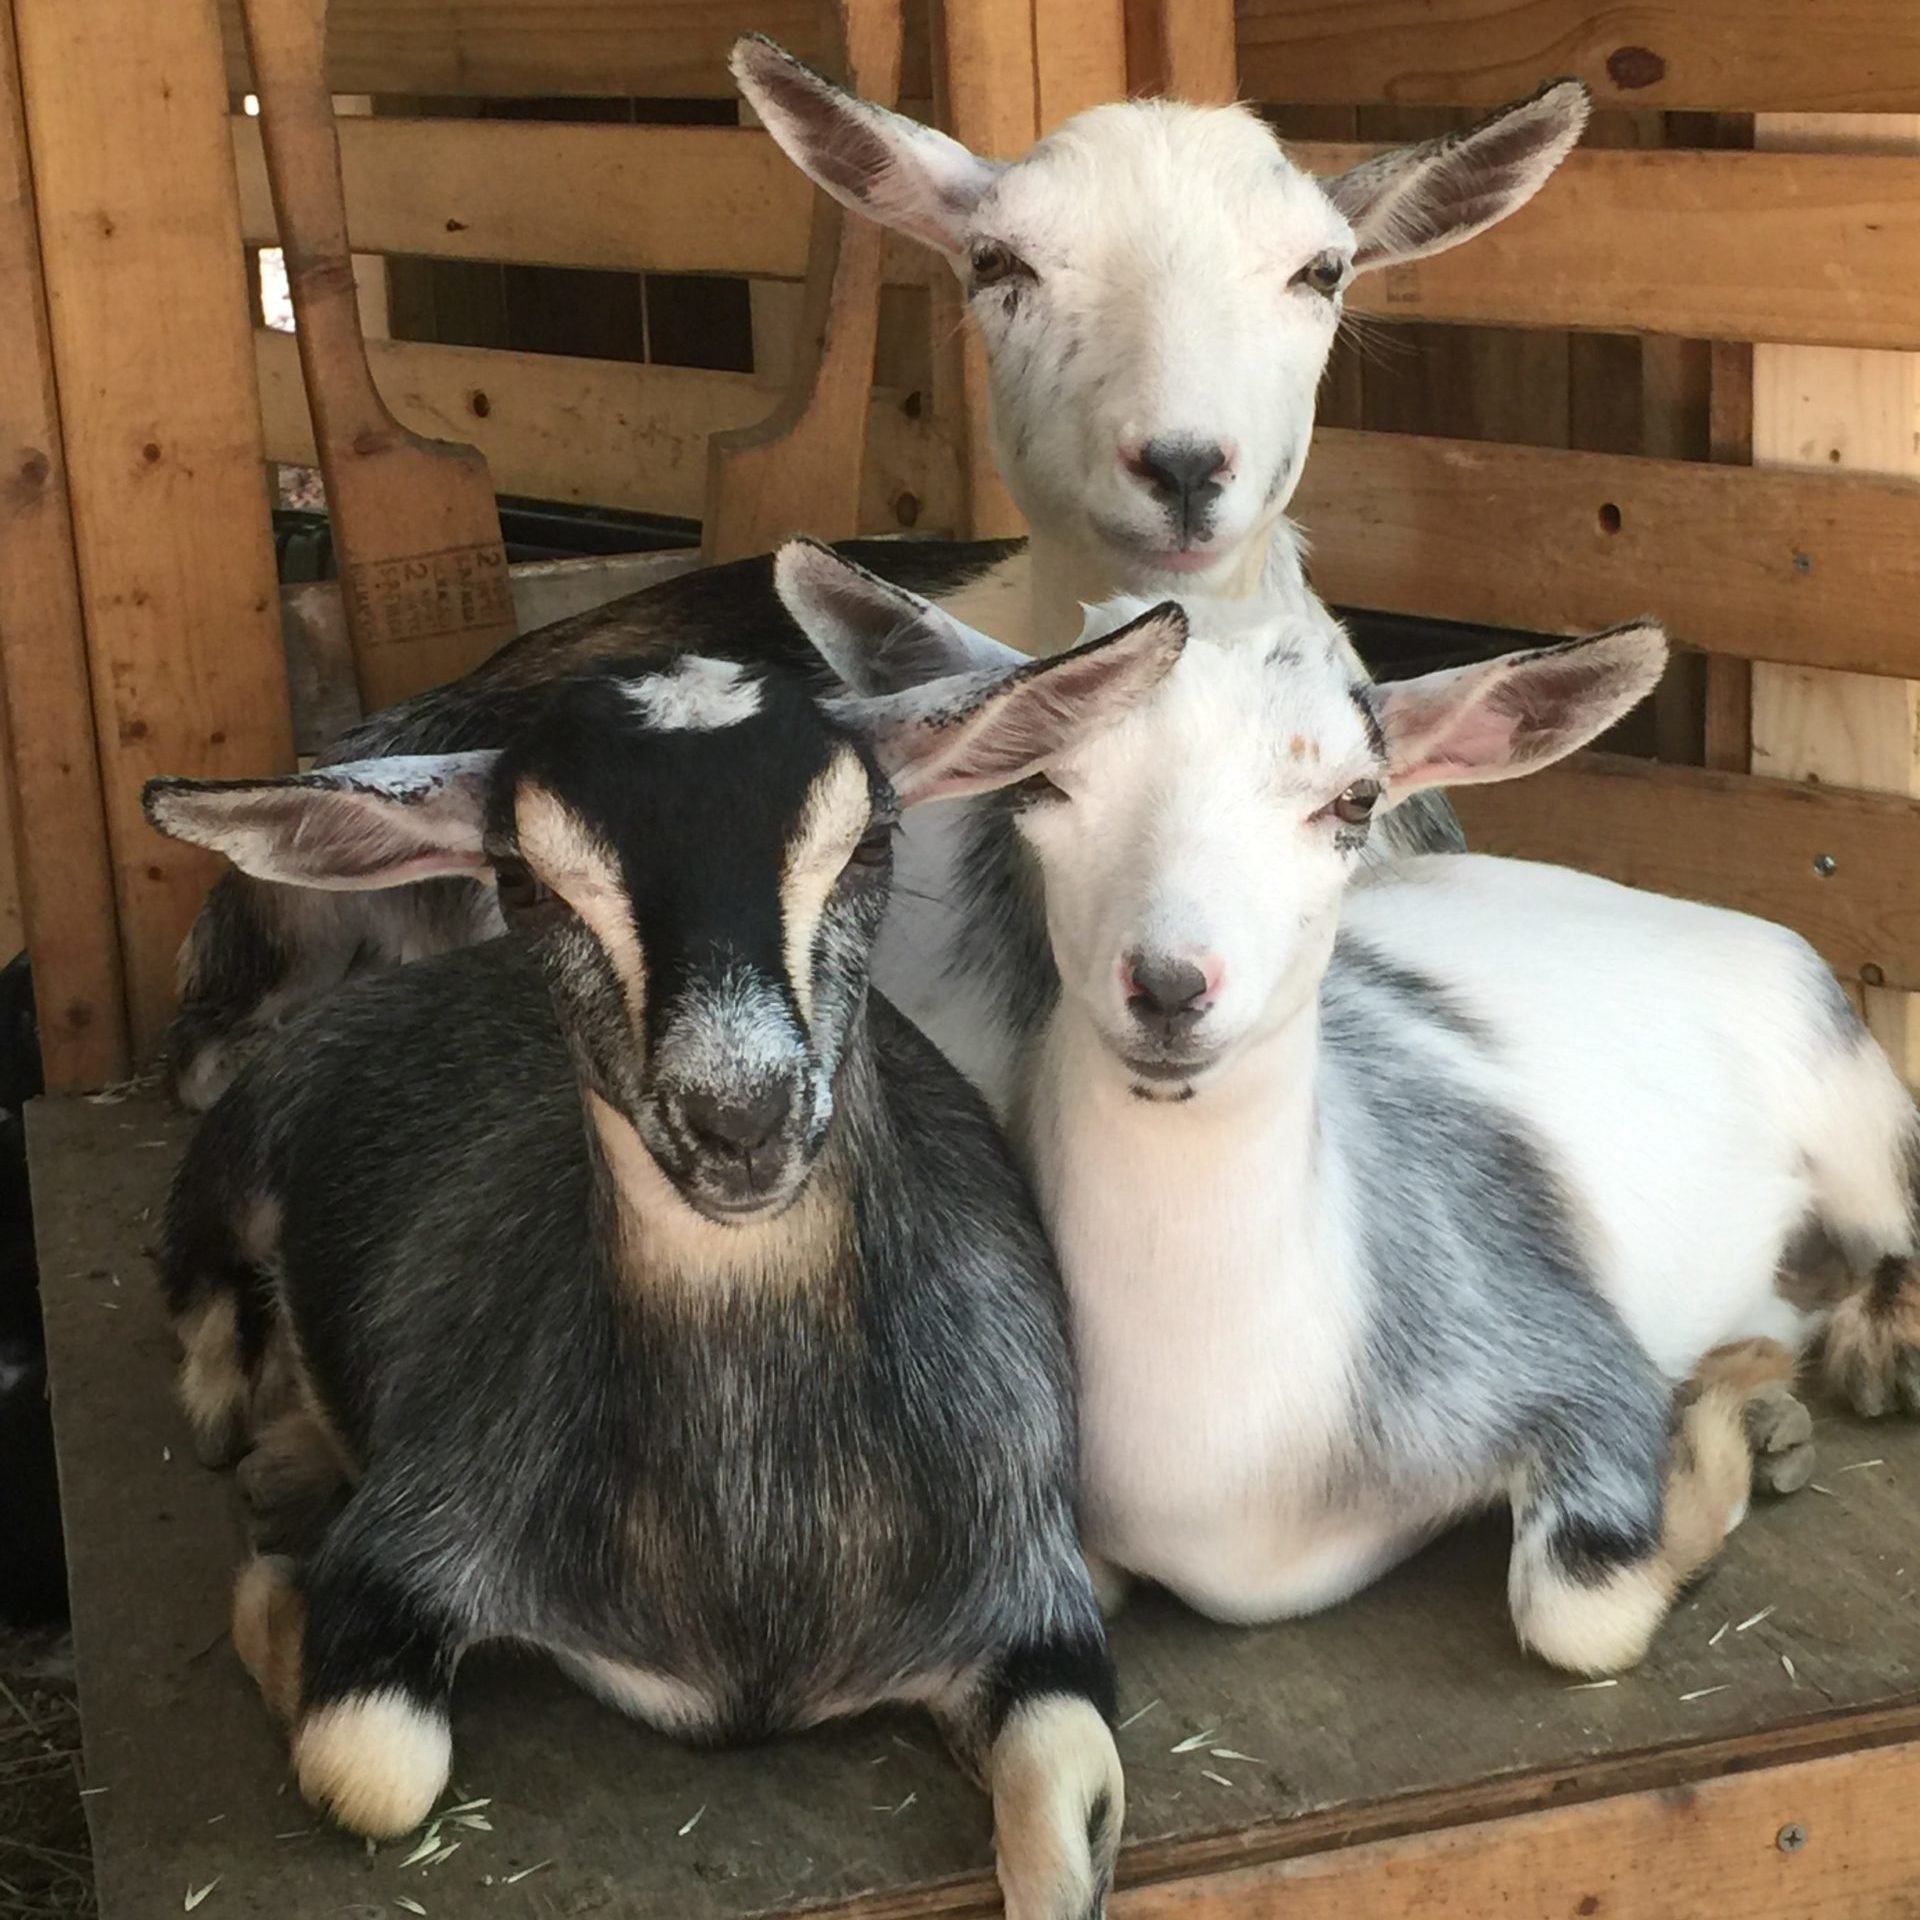 three goats sitting close together on a wooden platform